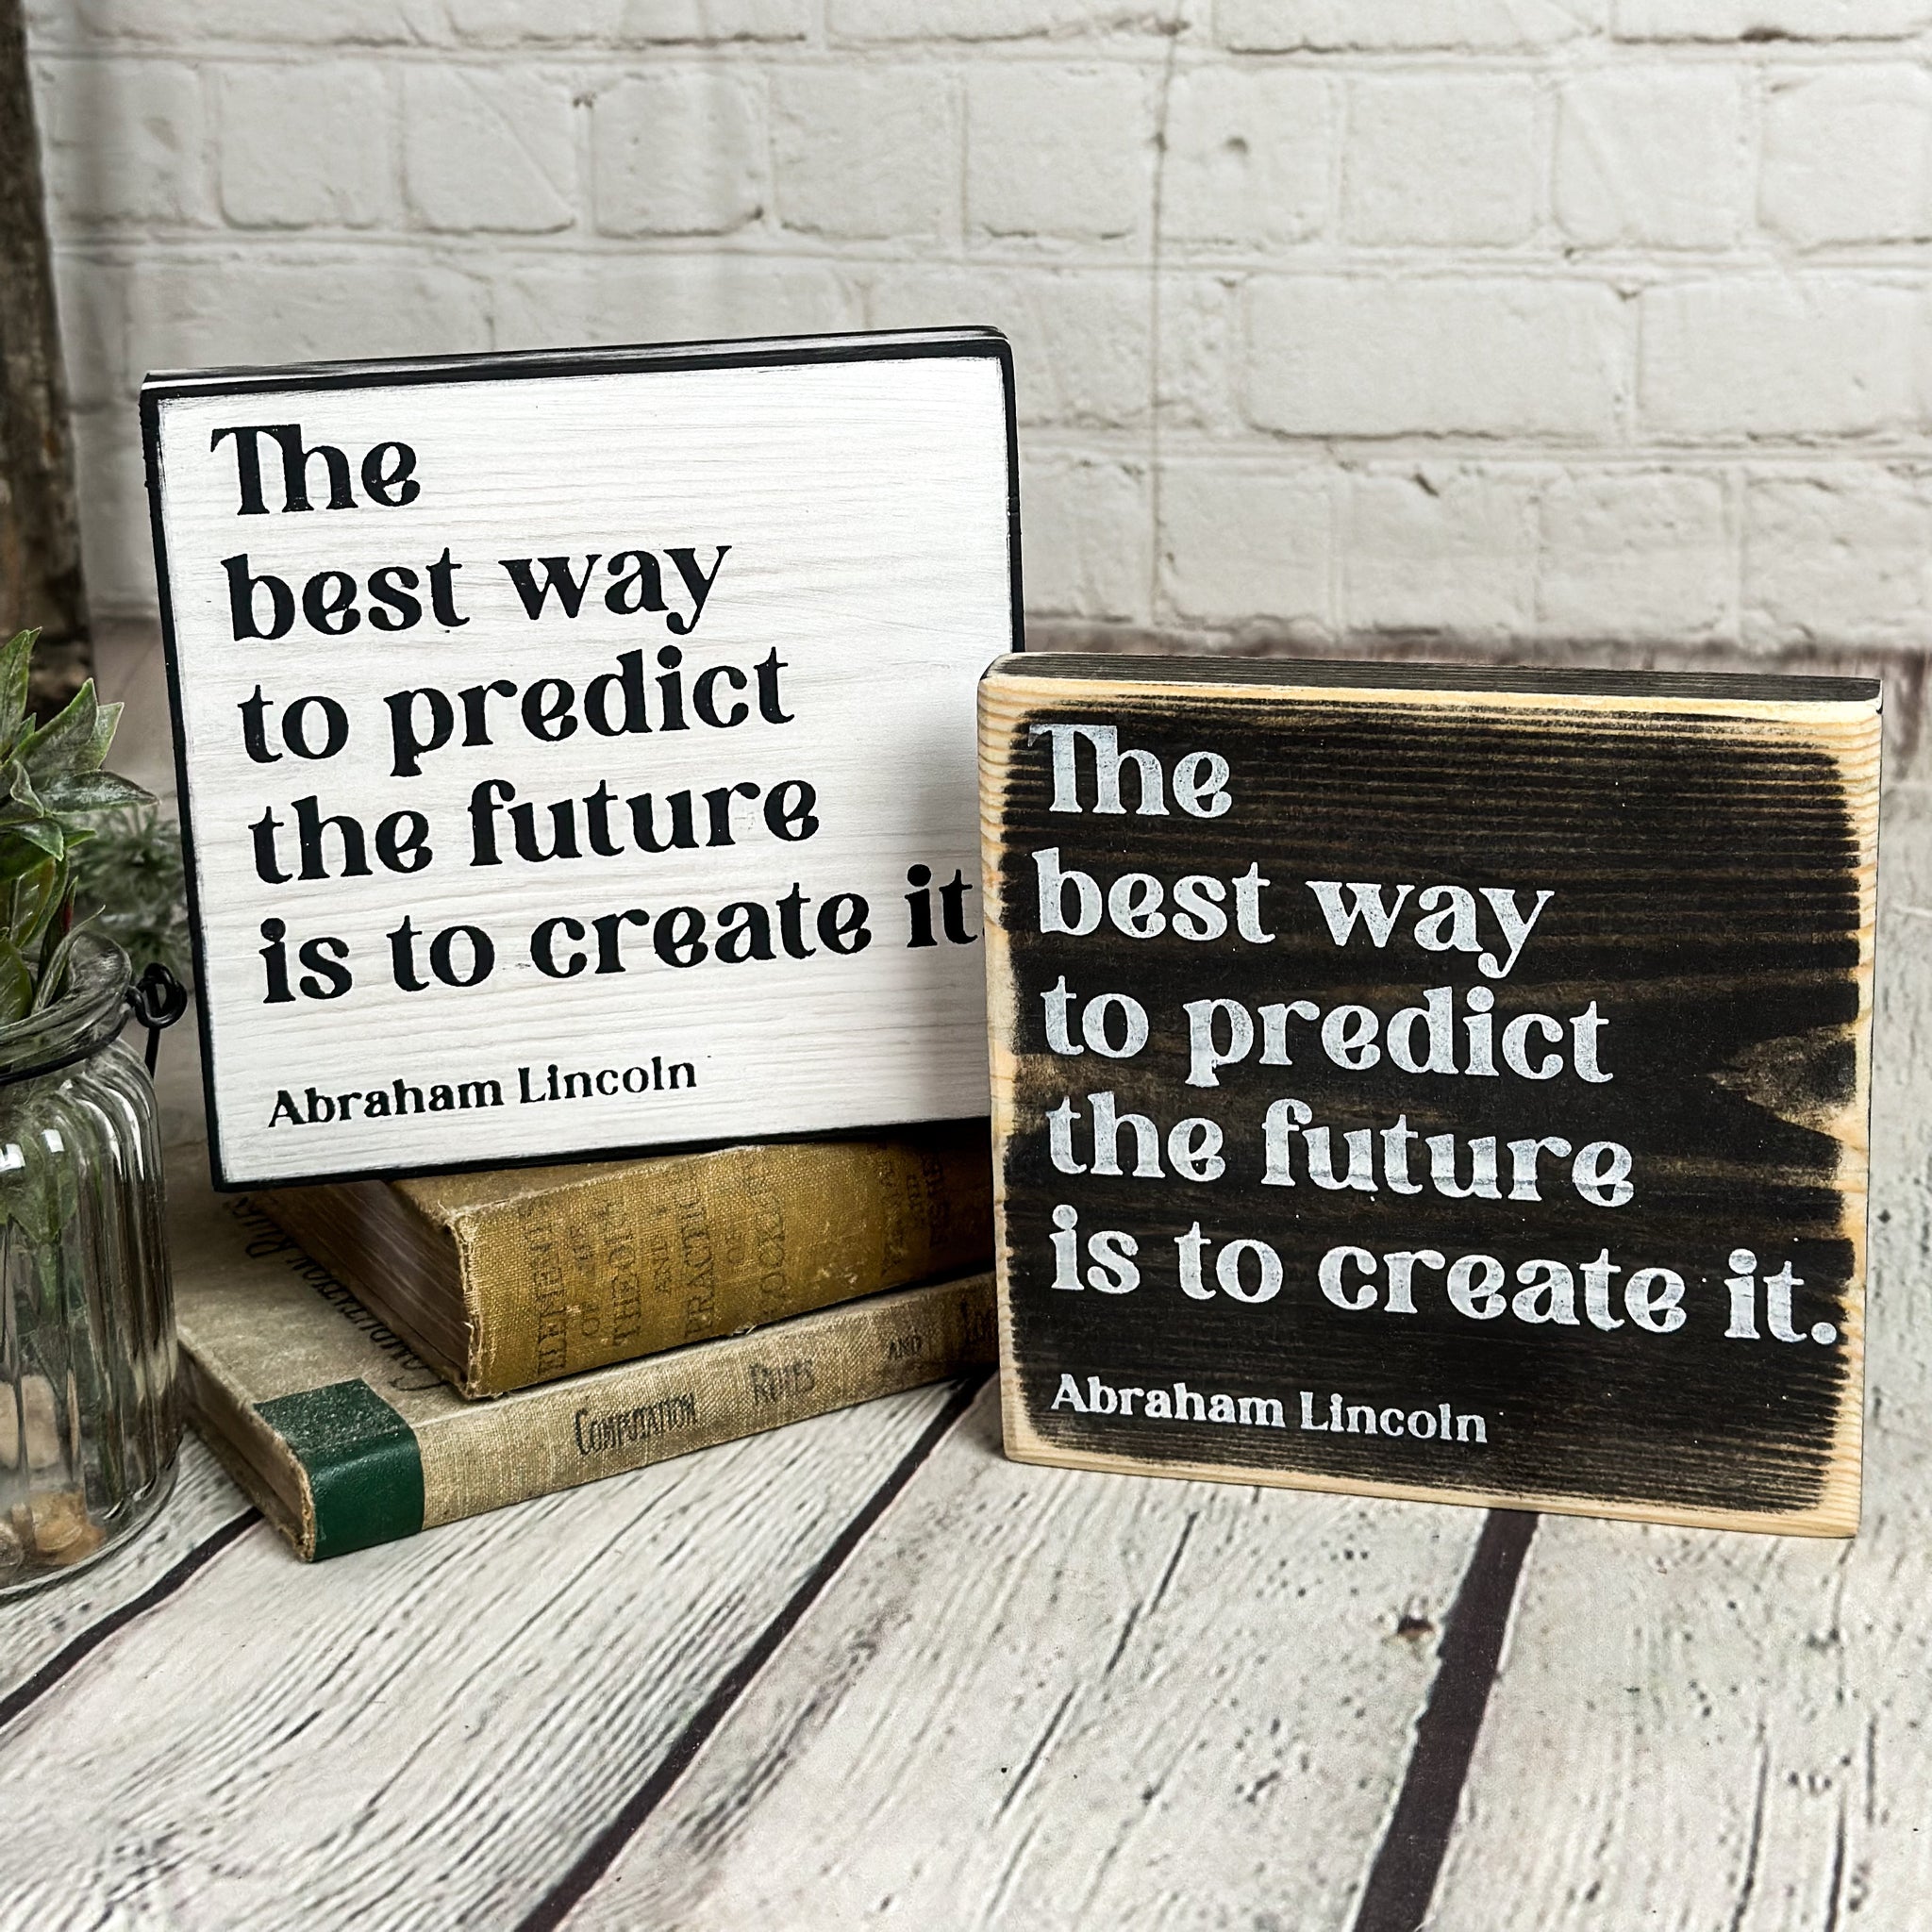 The Best Way to Predict the Future... (5.5" x 5.5")